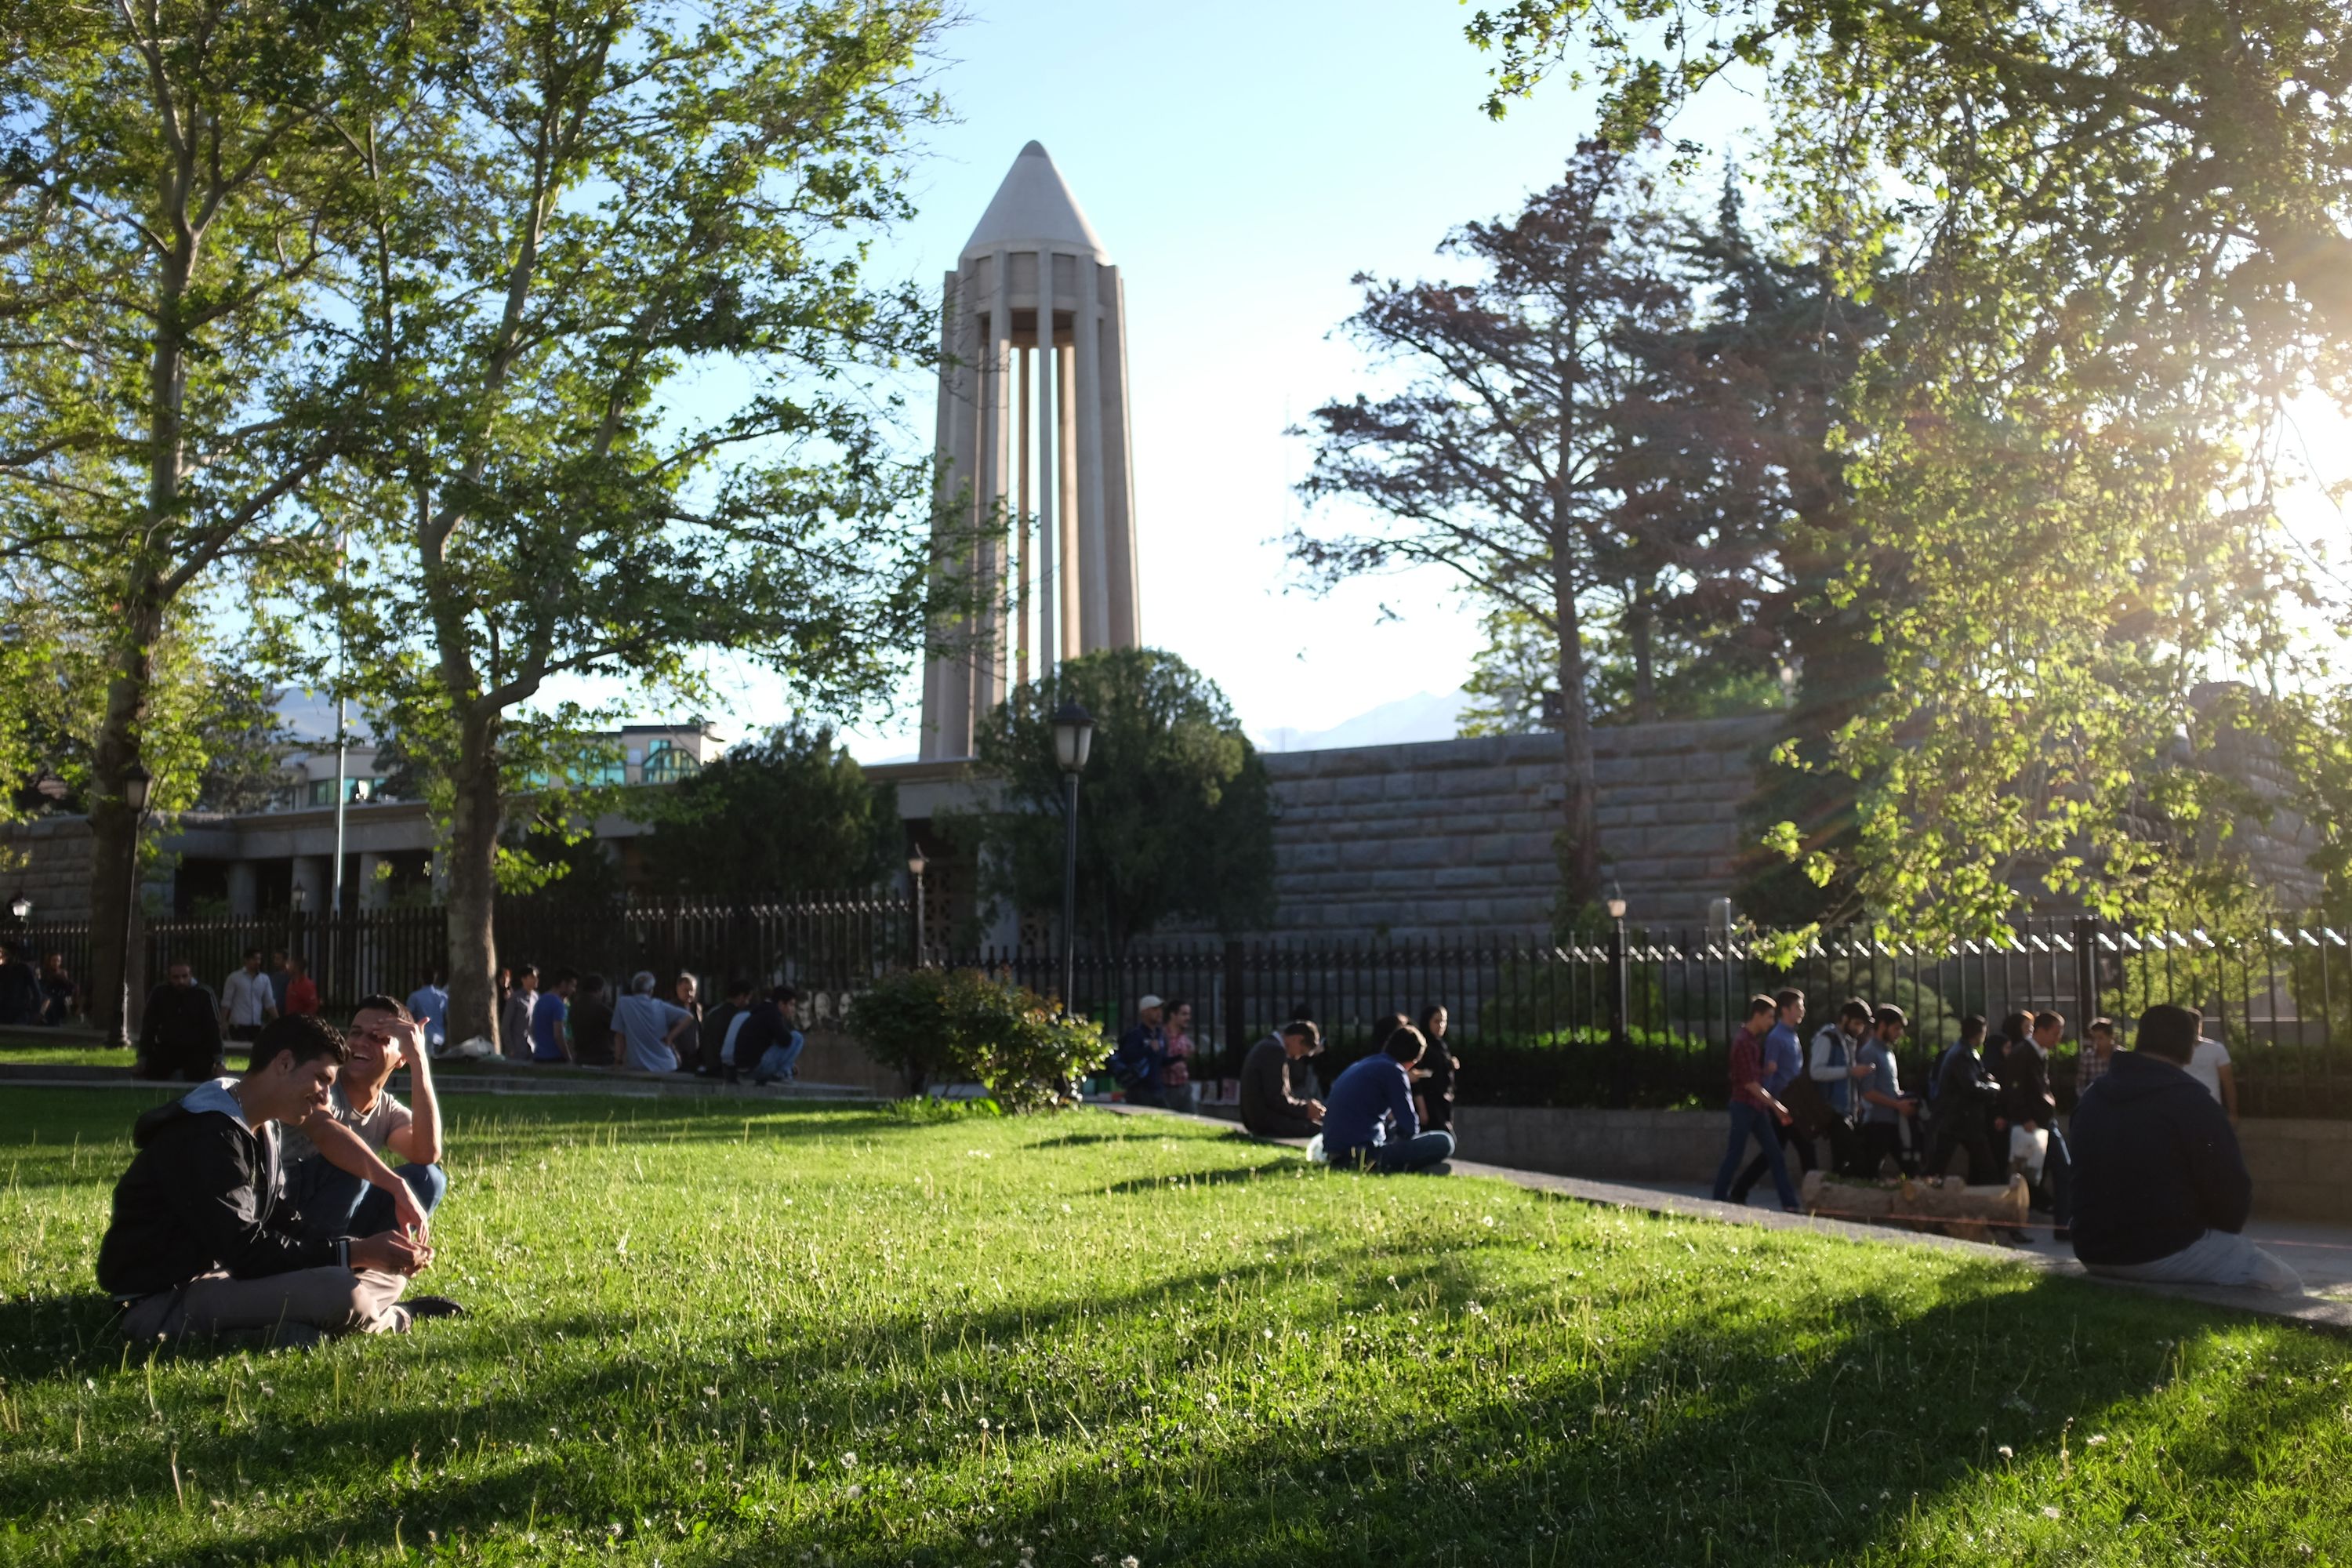 People sit in a park in the evening light in front of a tall building which looks like a concrete rocket.